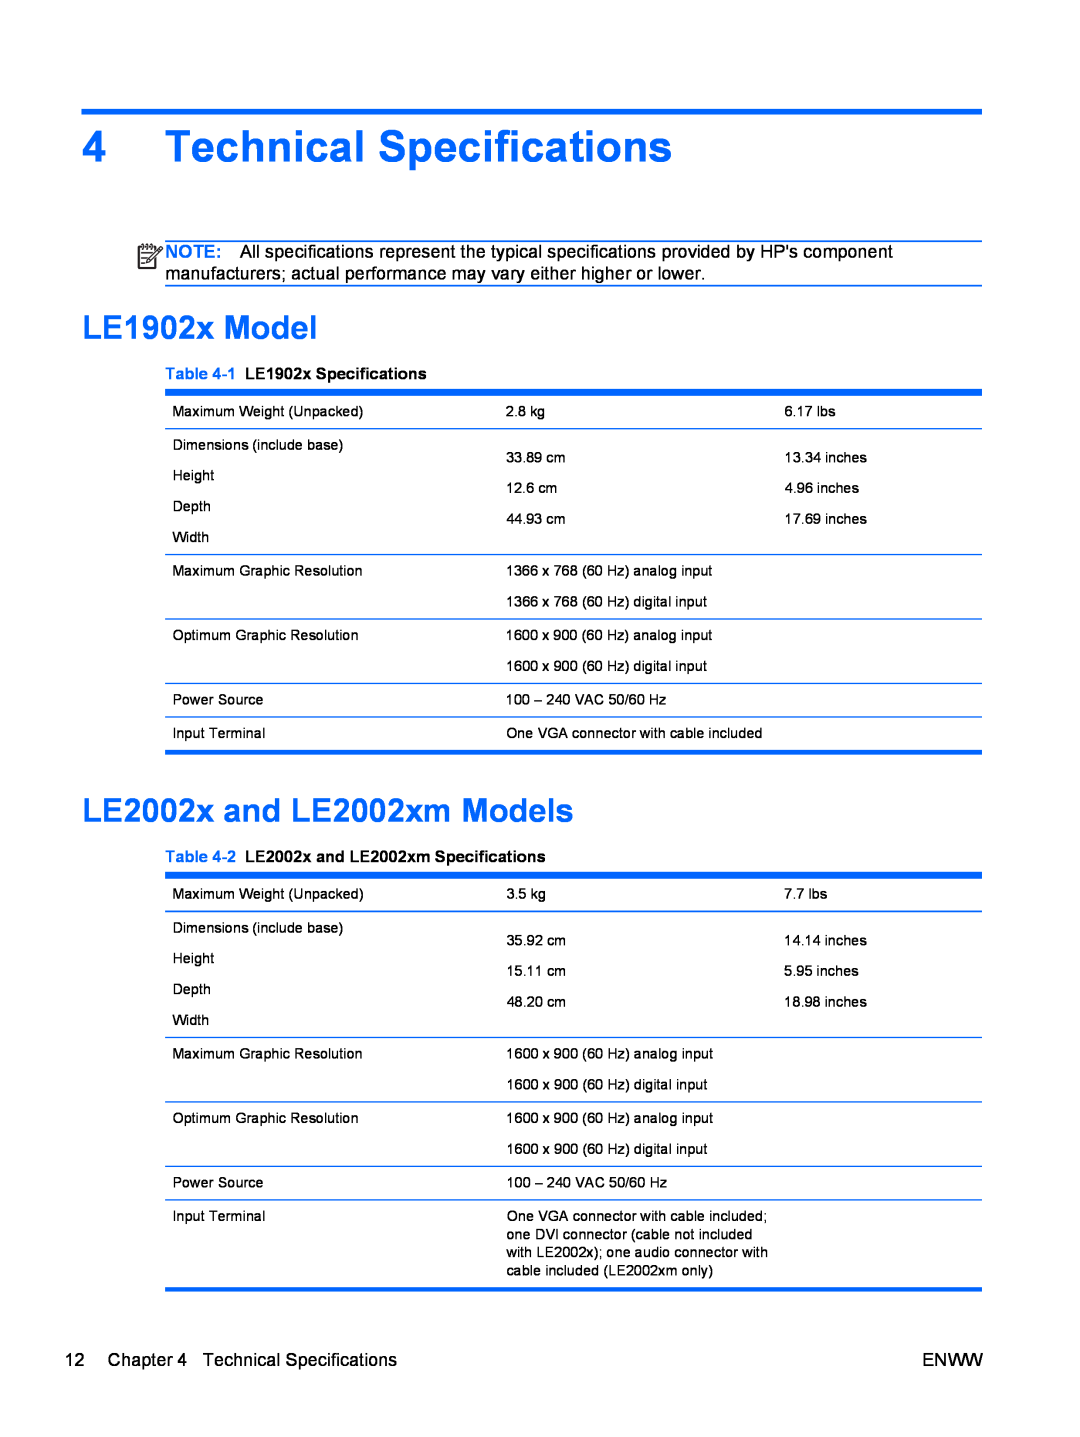 HP LE1902X, LE2002XM manual Technical Specifications, LE1902x Model, LE2002x and LE2002xm Models, 1 LE1902x Specifications 